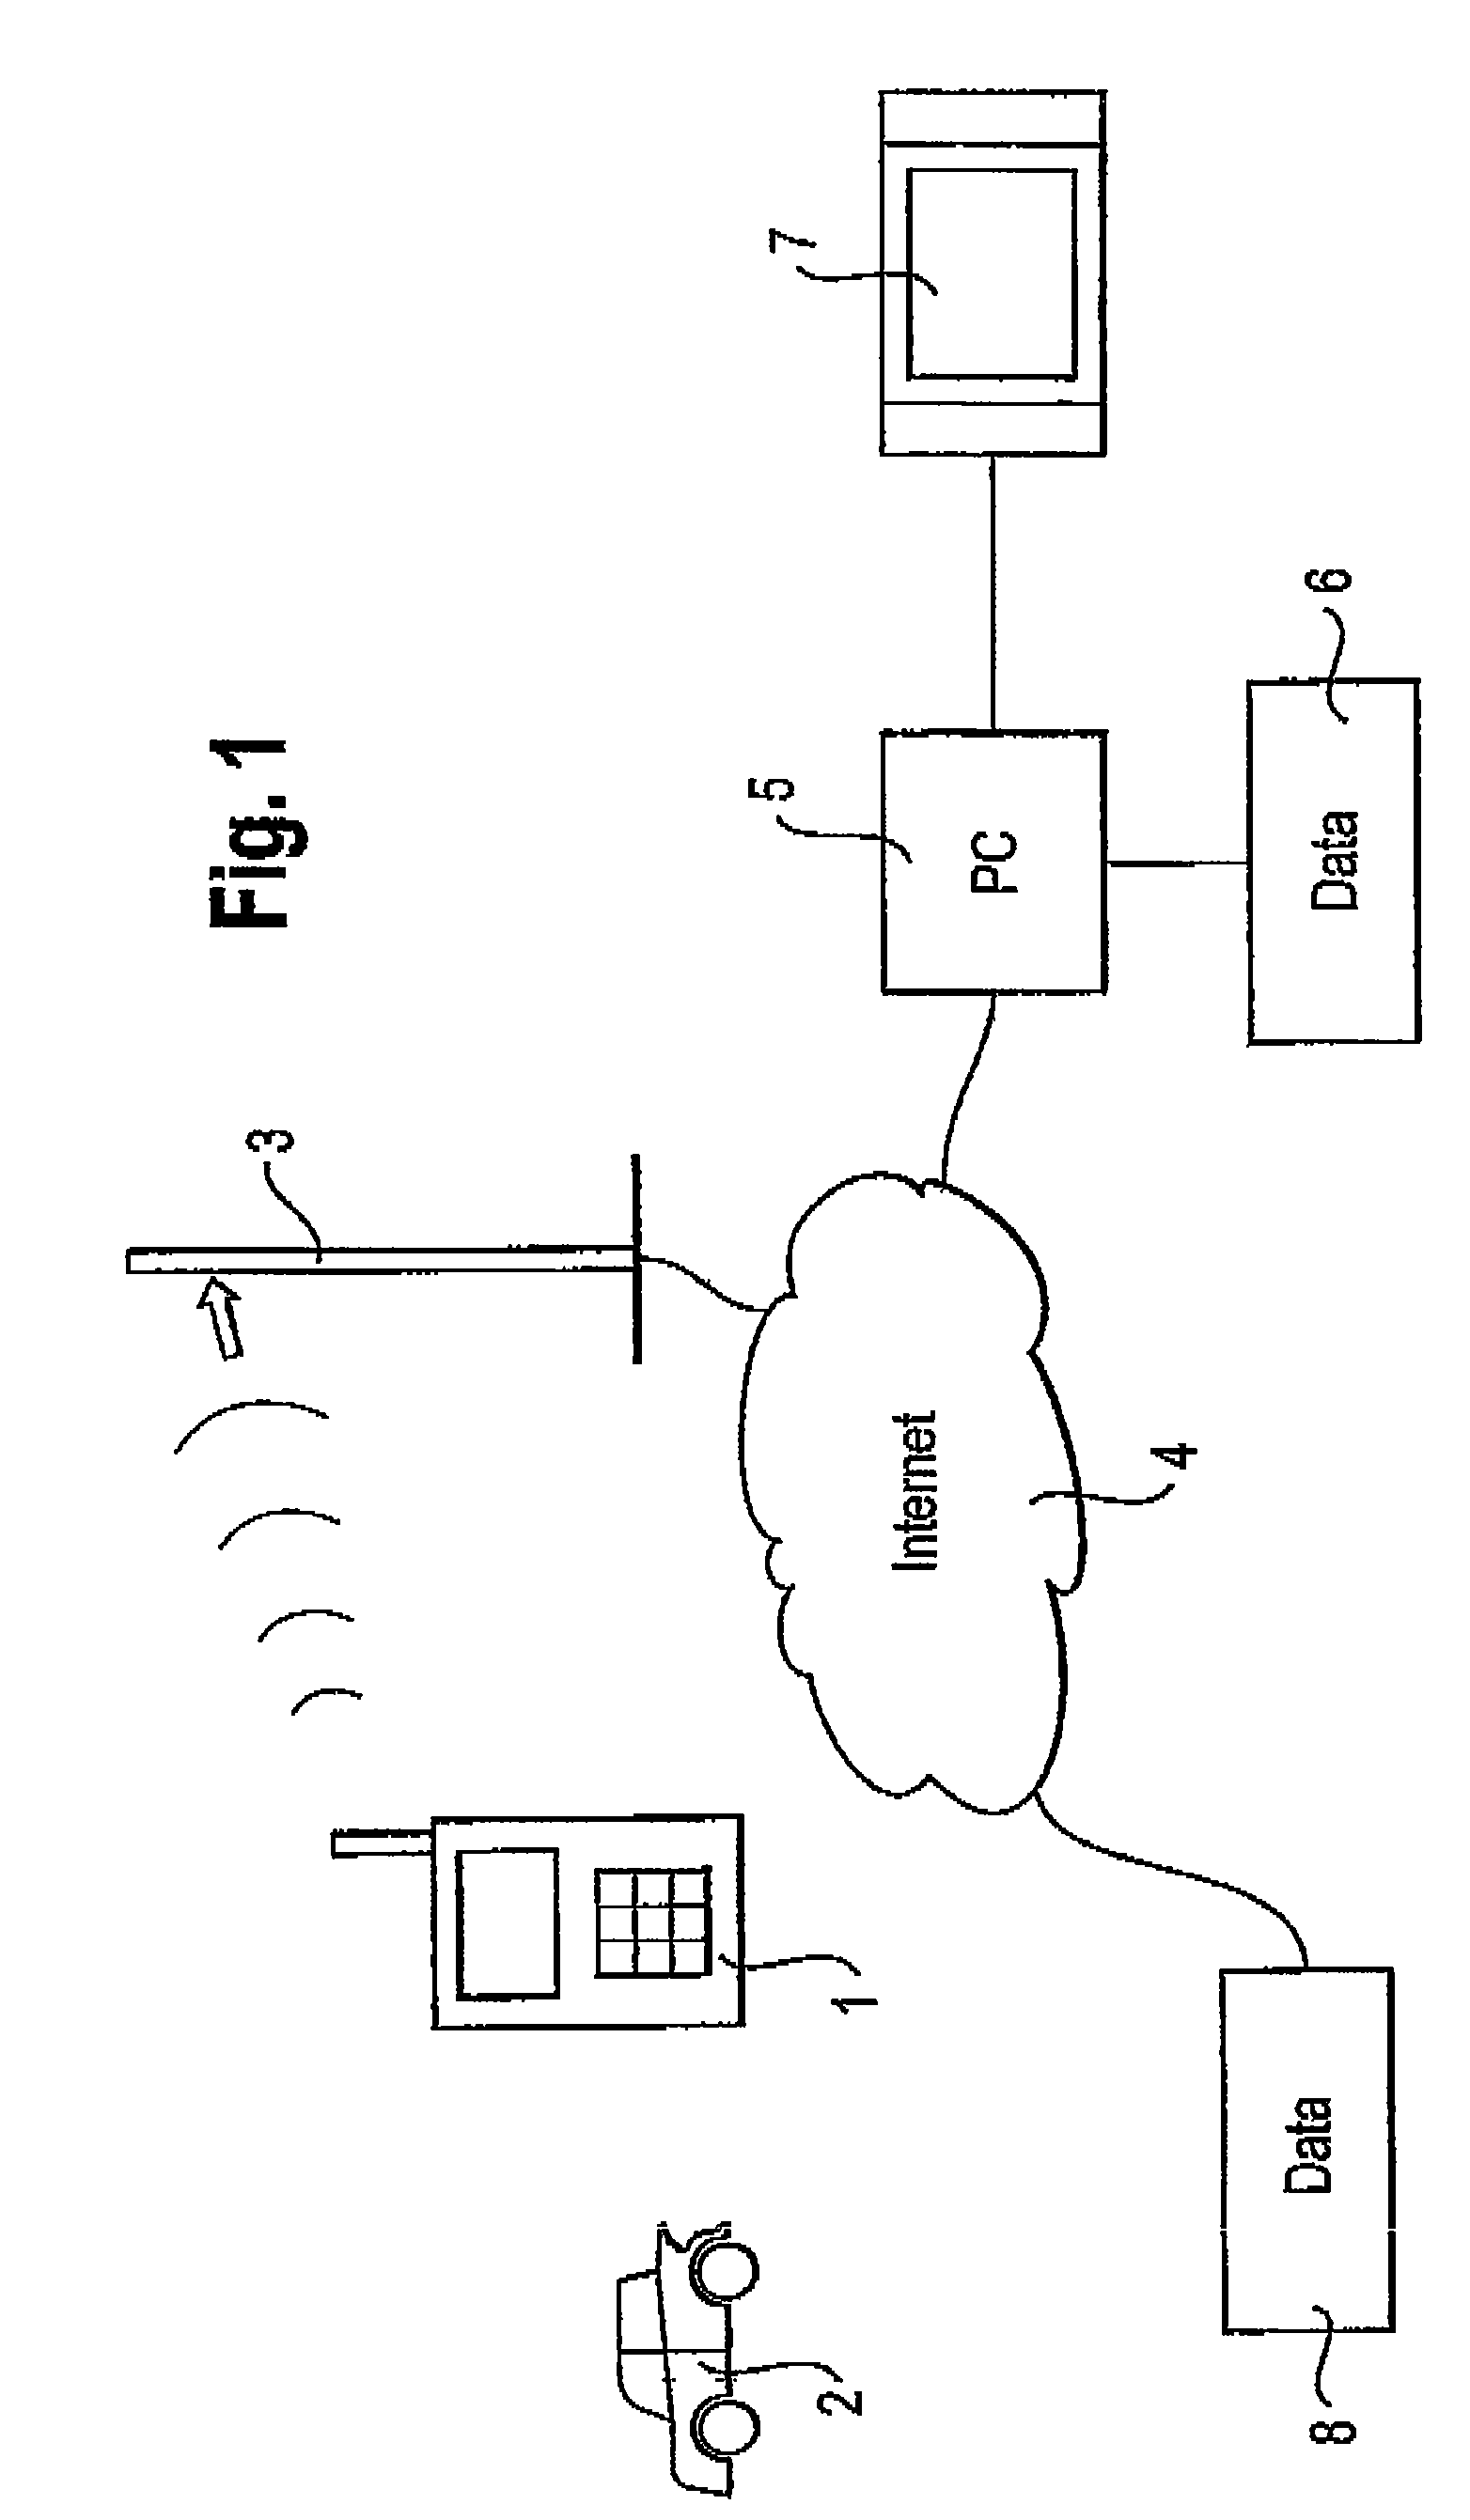 Method and apparatus for determining the alteration of the shape of a three dimensional object